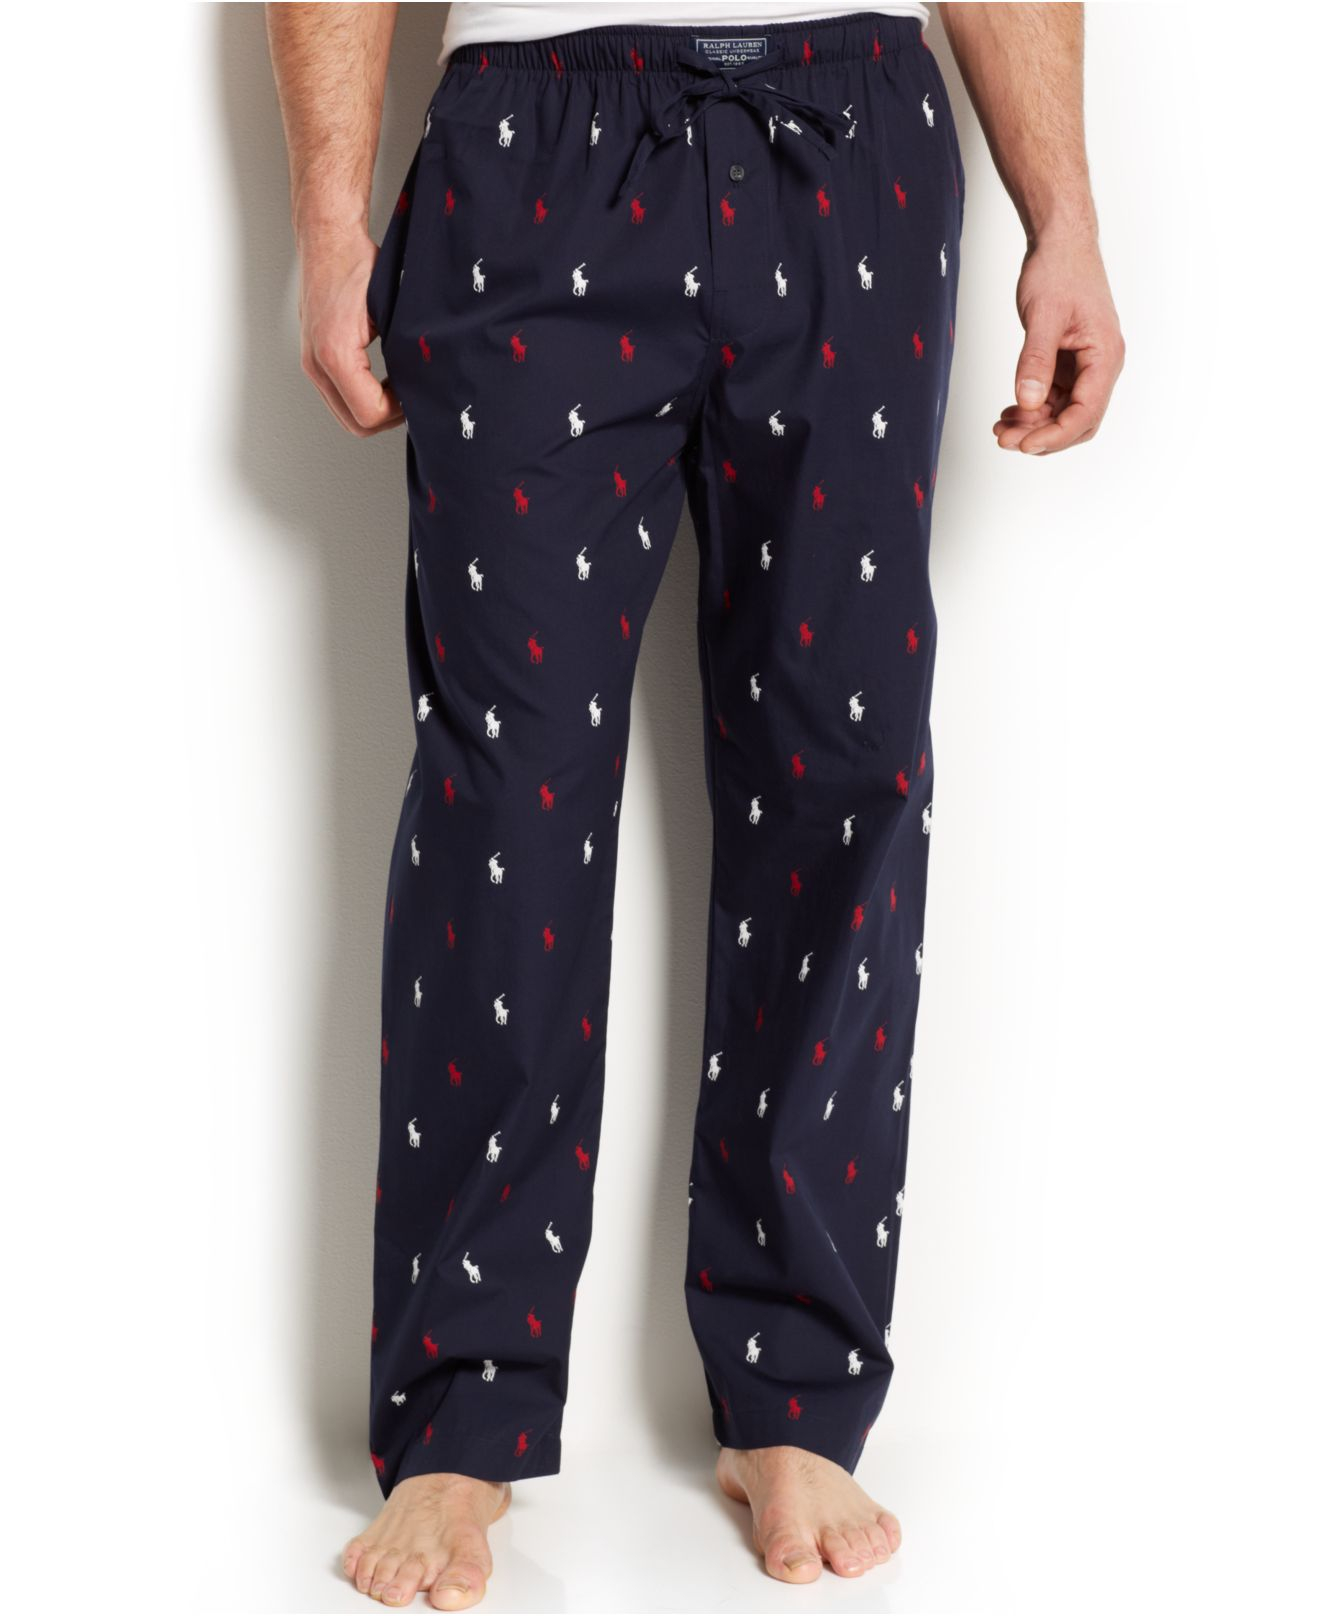 Lyst - Polo Ralph Lauren Allover Pony Pajama Pants in Blue for Men